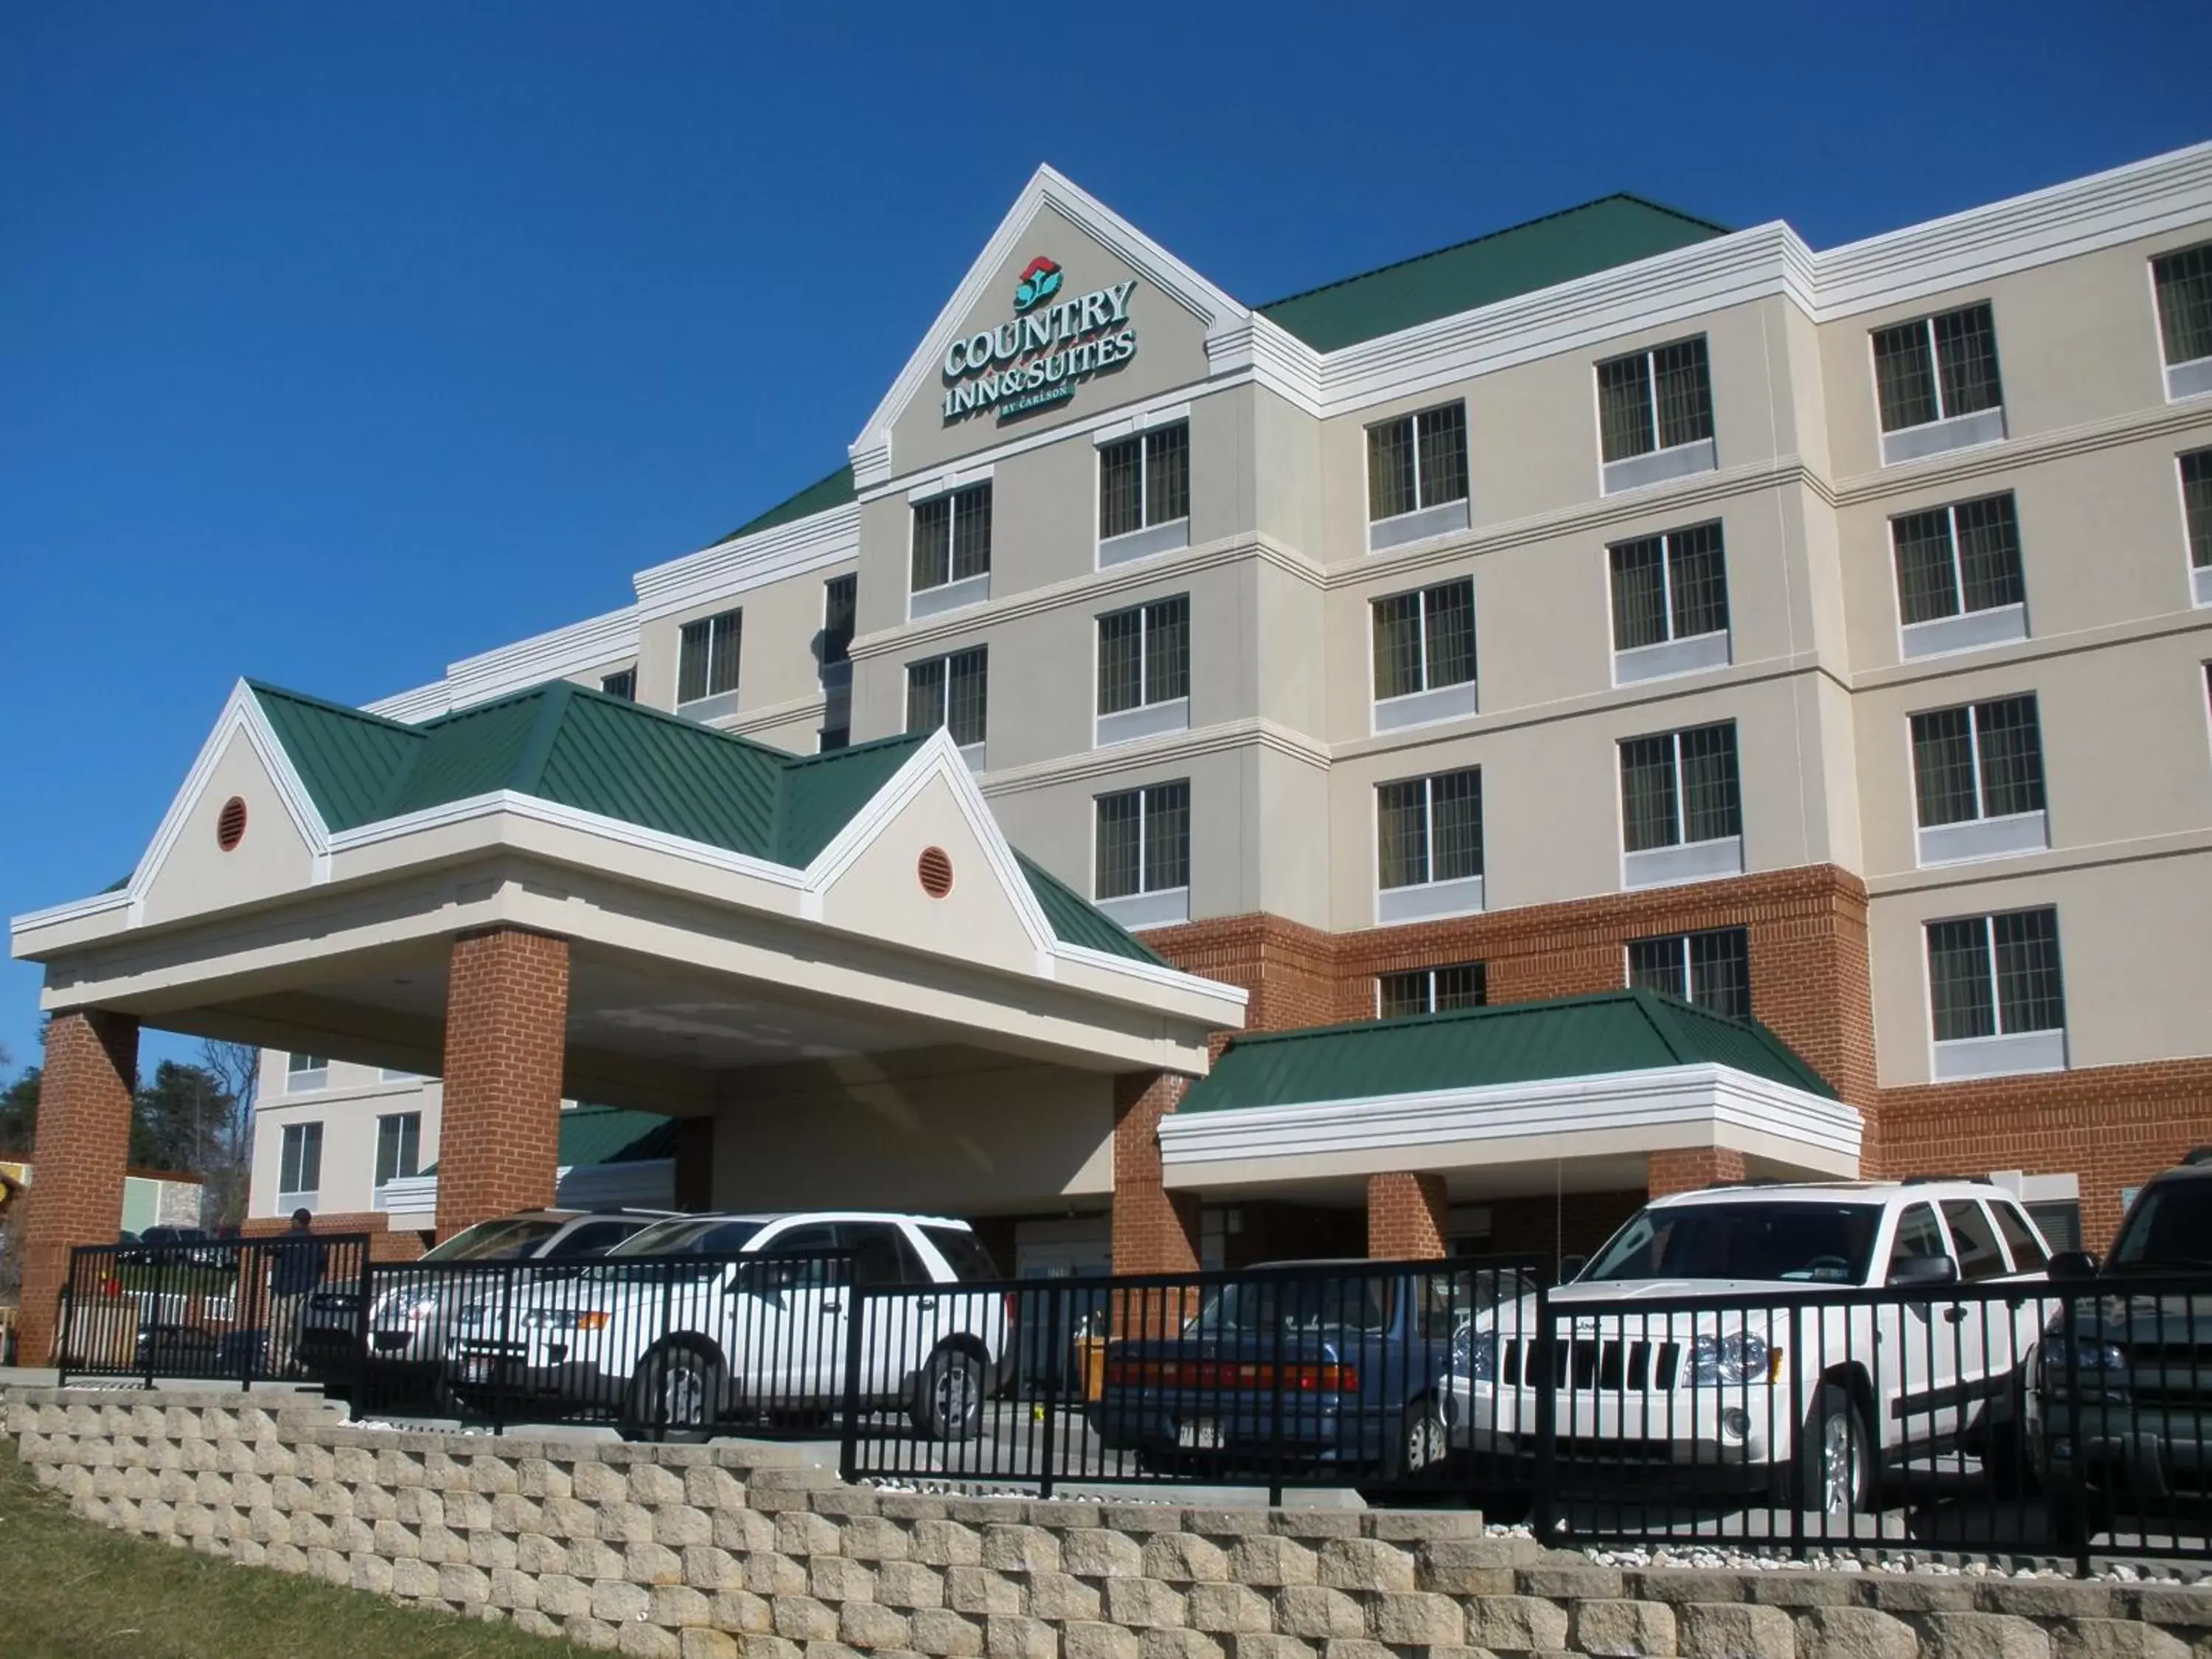 Facade/entrance, Property Building in Country Inn & Suites by Radisson, BWI Airport (Baltimore), MD